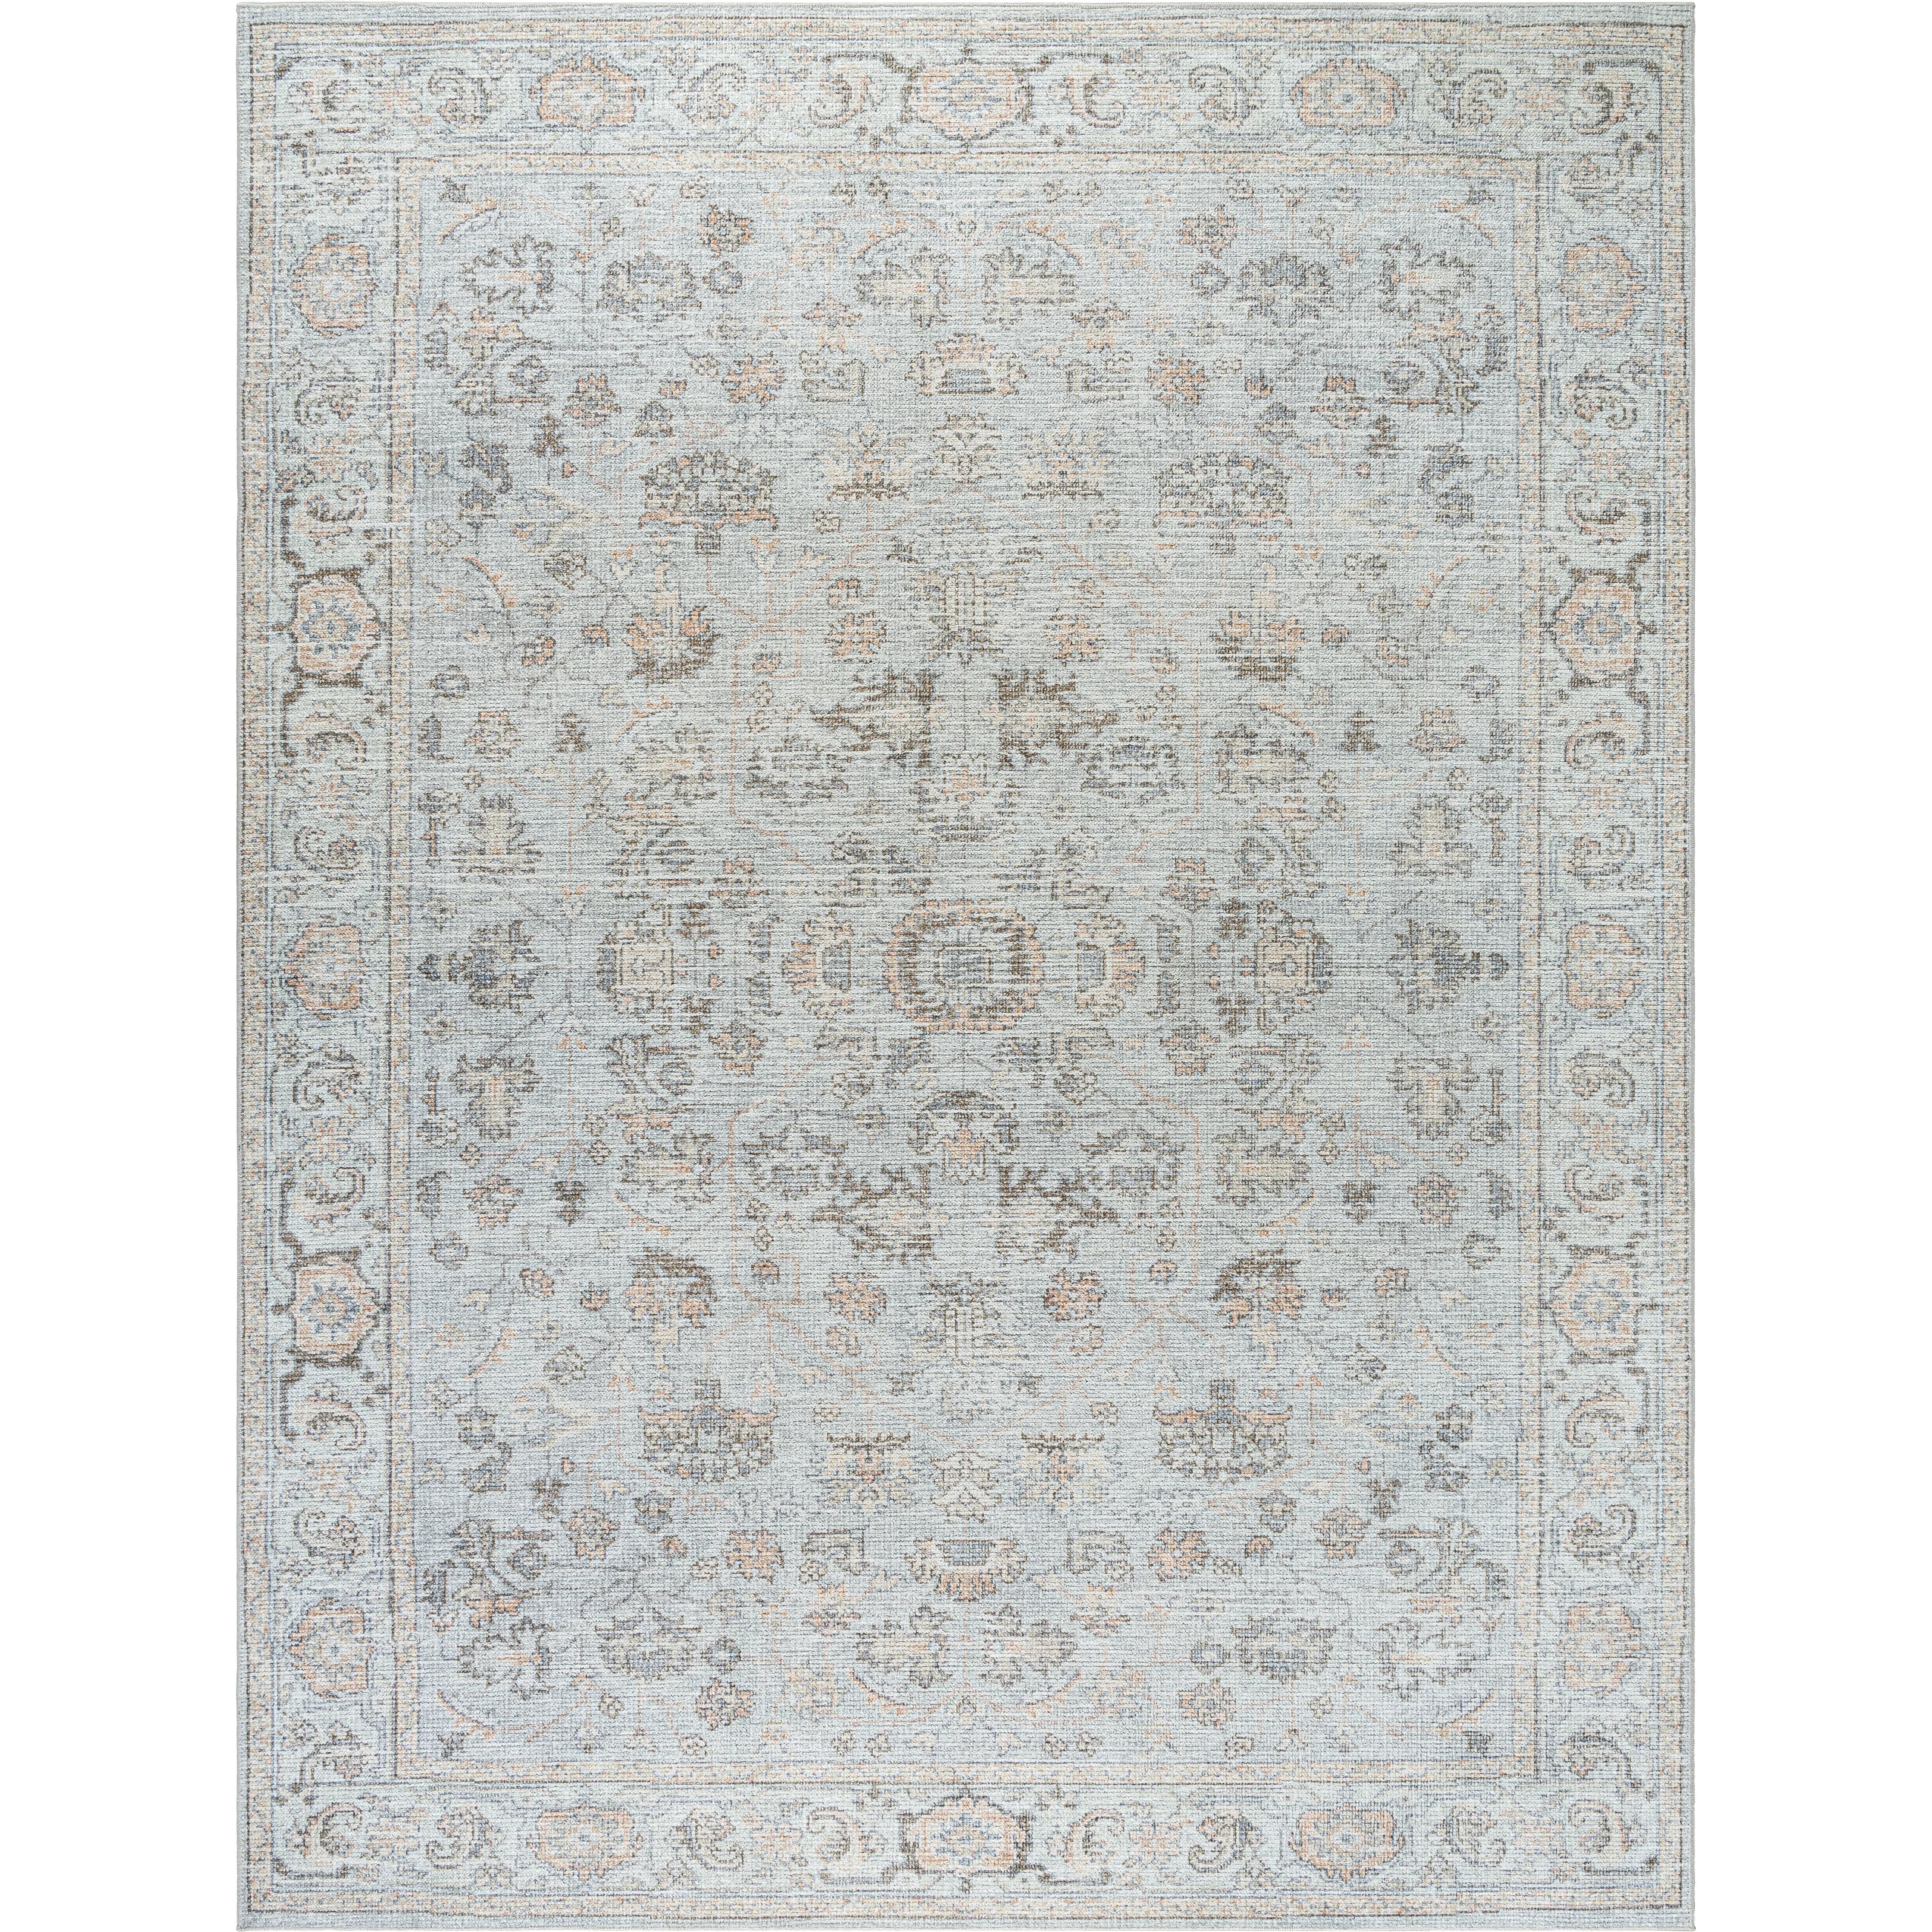 PNW Home x Surya available at Amethyst Home shipping to Australia, UK, and Canada. Organic modern design with easy to clean rugs for a family home in  the Los Angeles metro area.